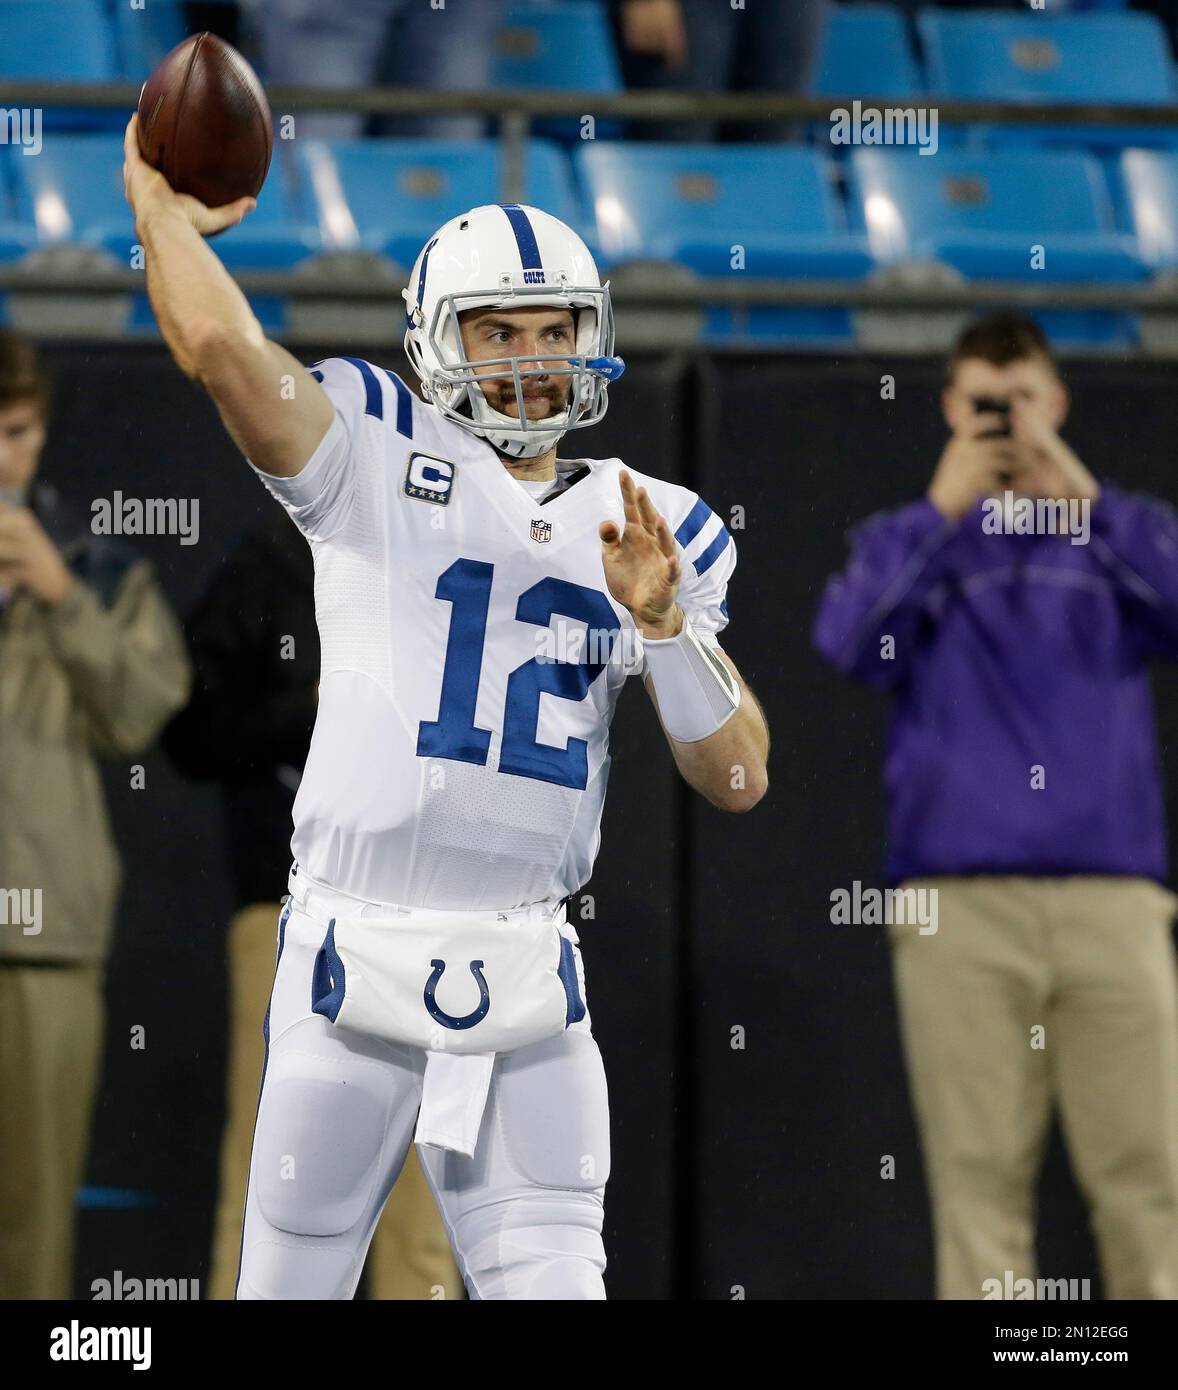 Sunday's top NFL game: Andrew Luck keeps Indianapolis Colts in